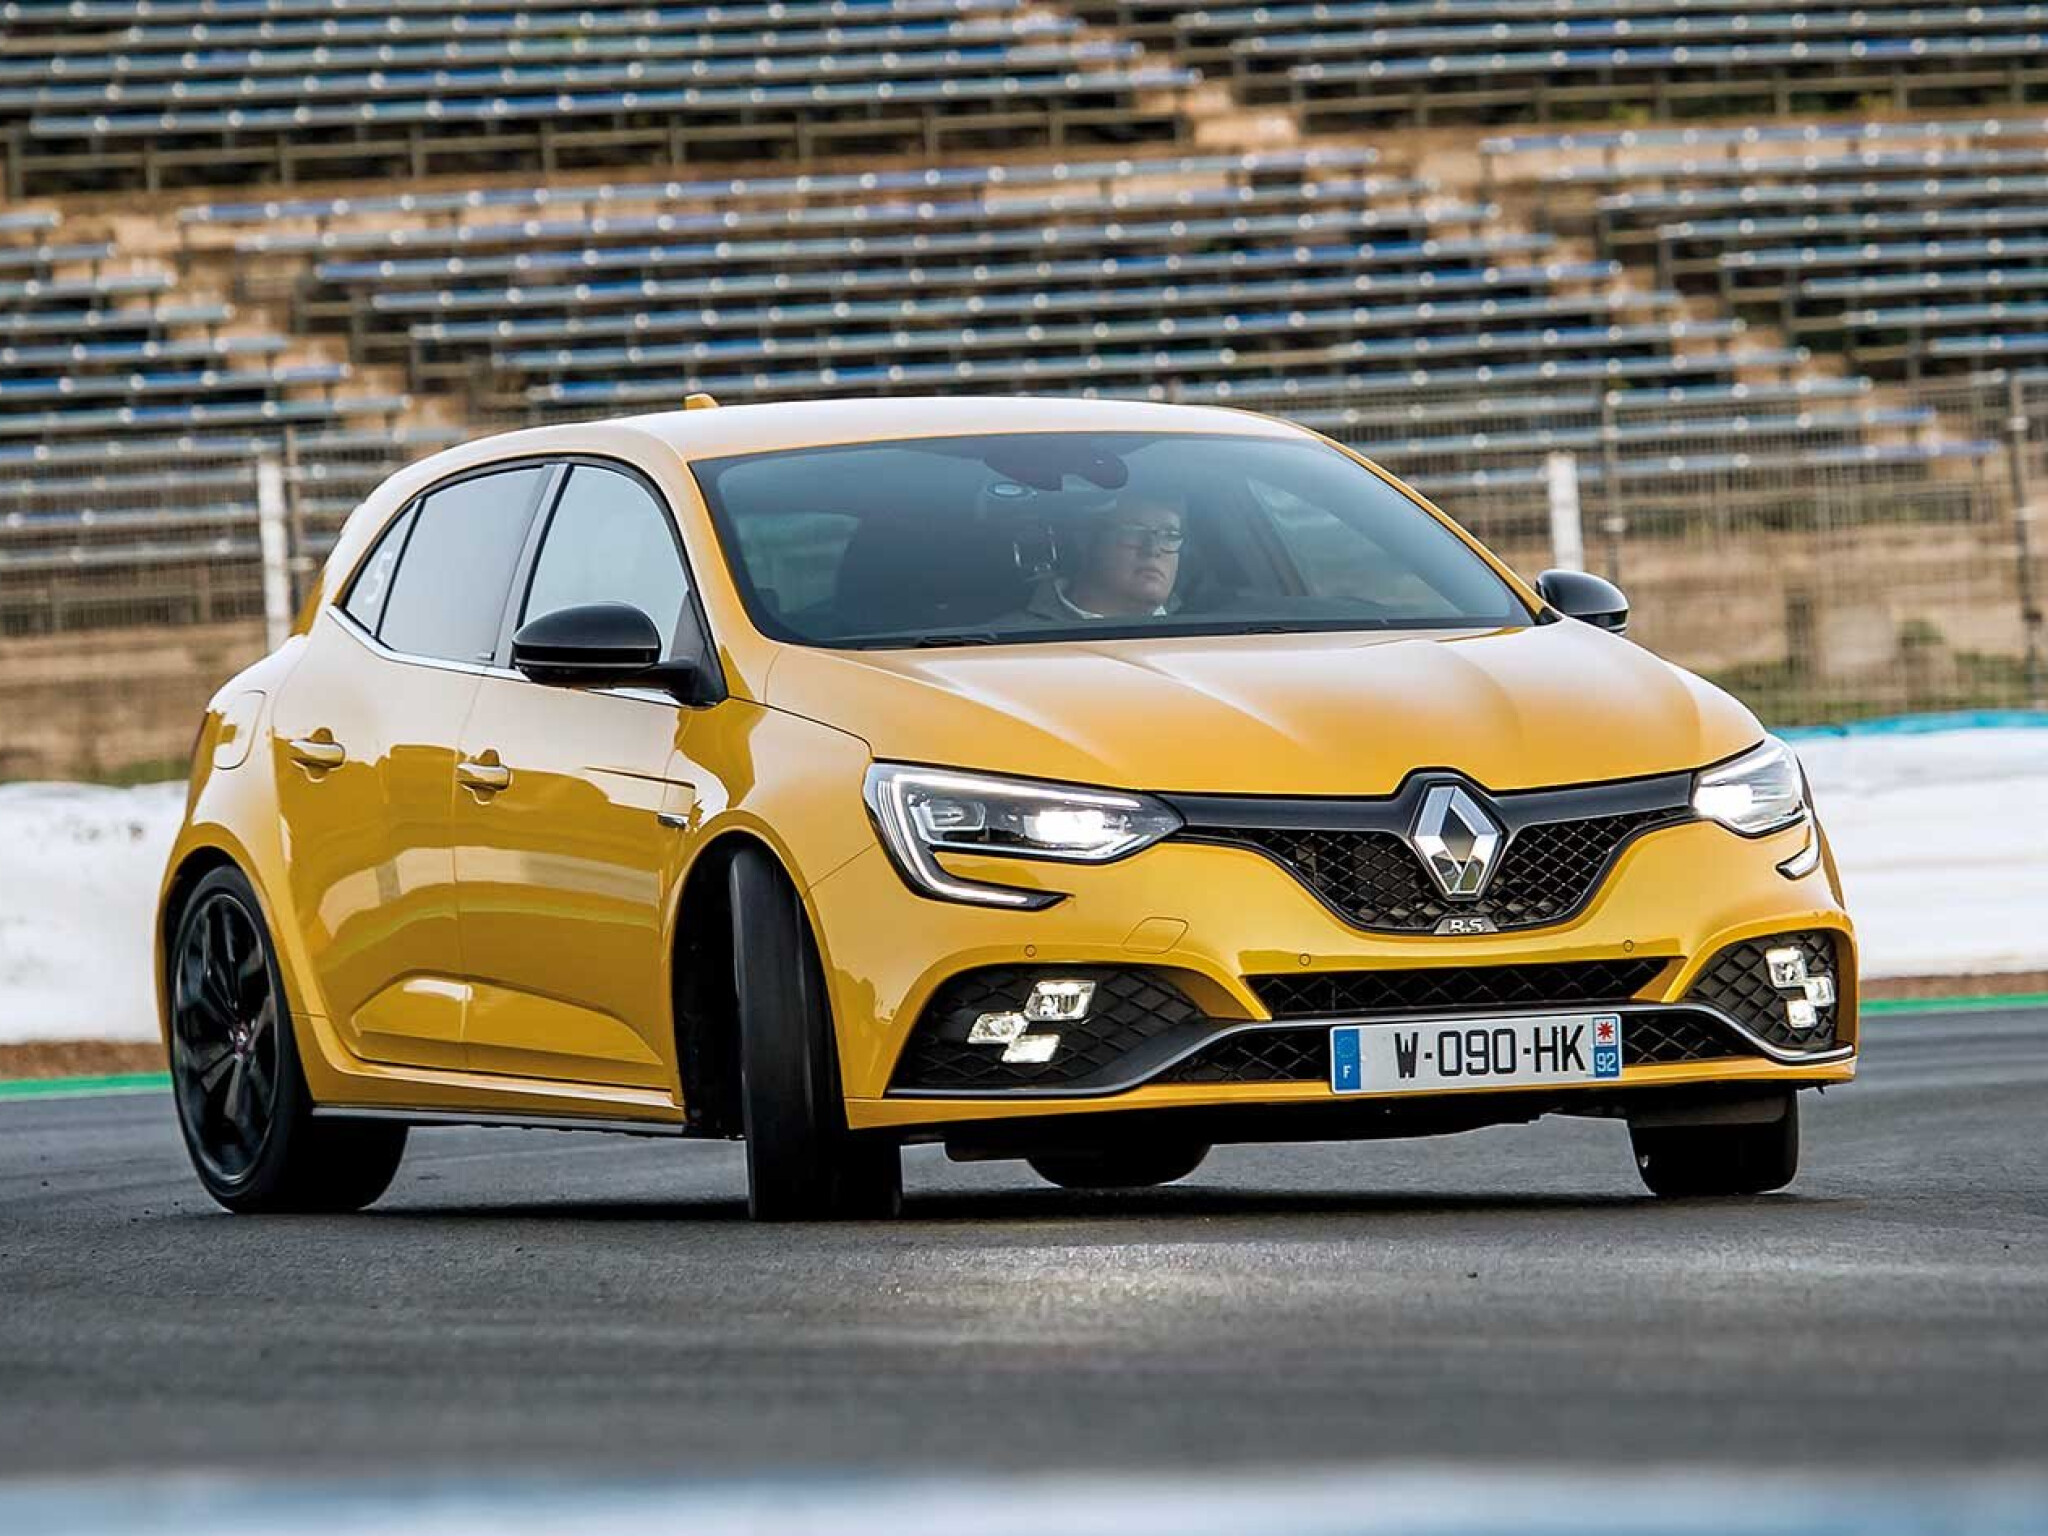 2018 Renault Mégane RS 280 Cup performance review